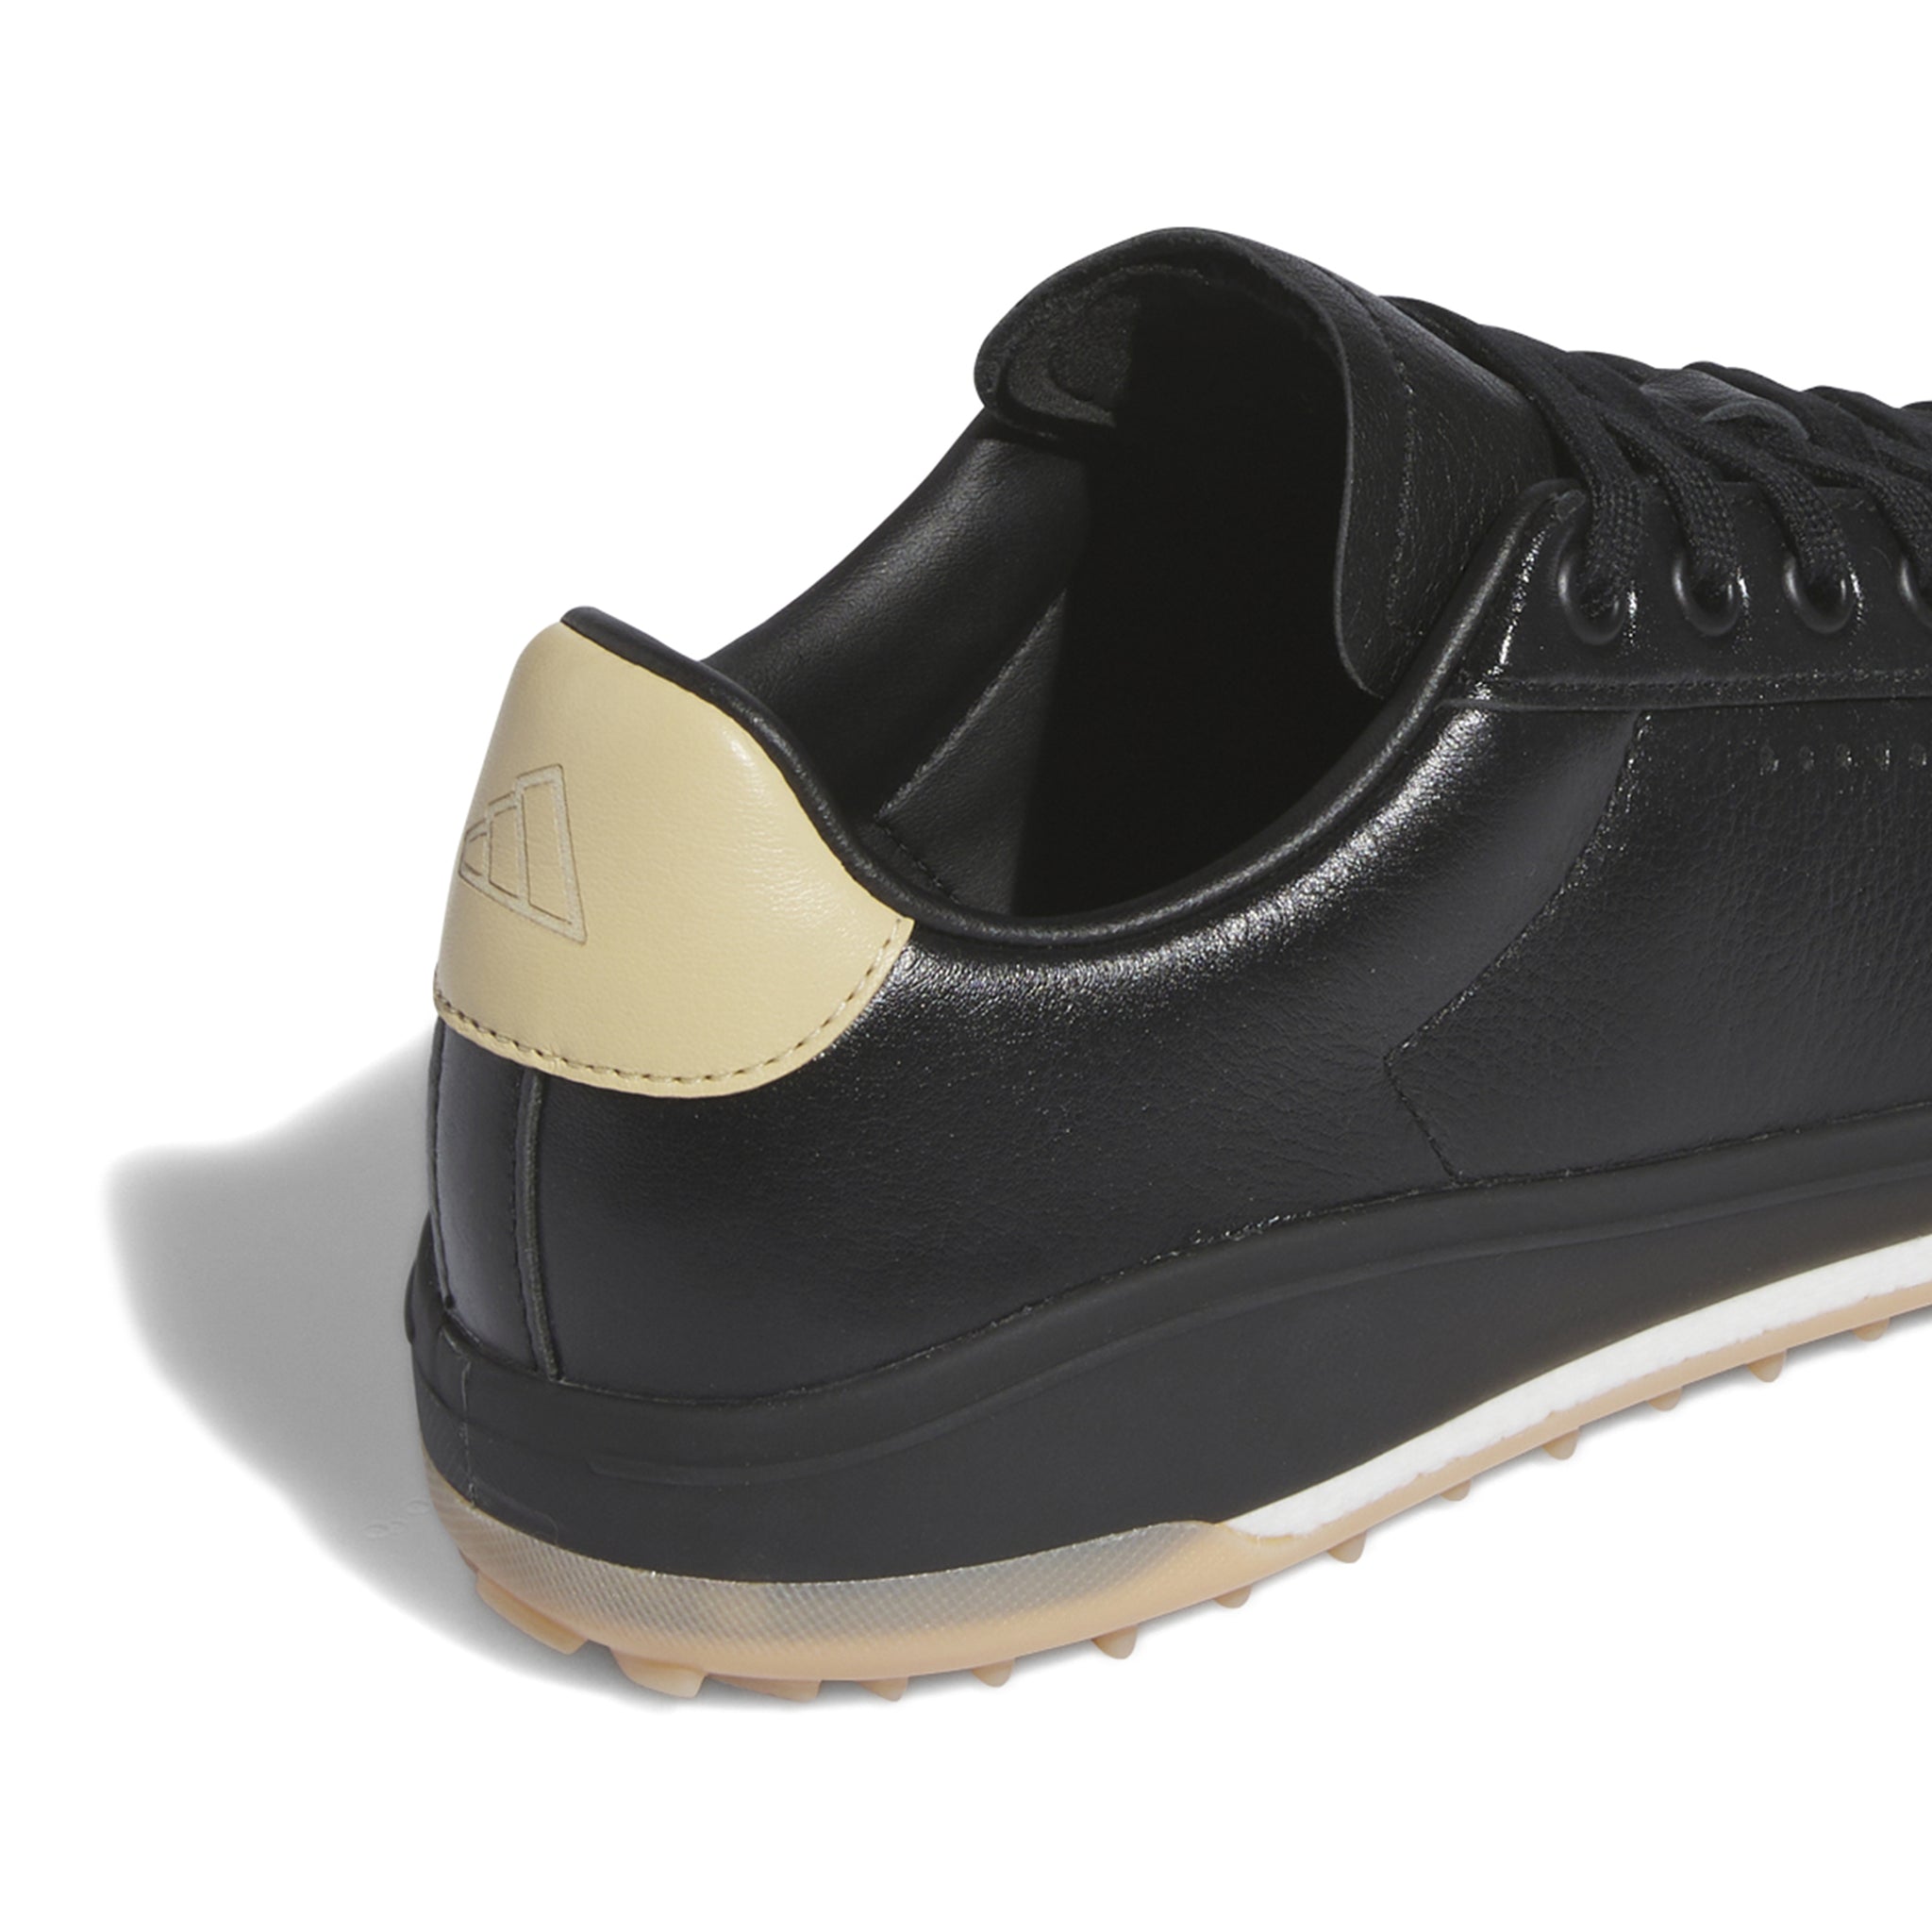 adidas-go-to-spikeless-2-golf-shoes-if0335-core-black-gum-3